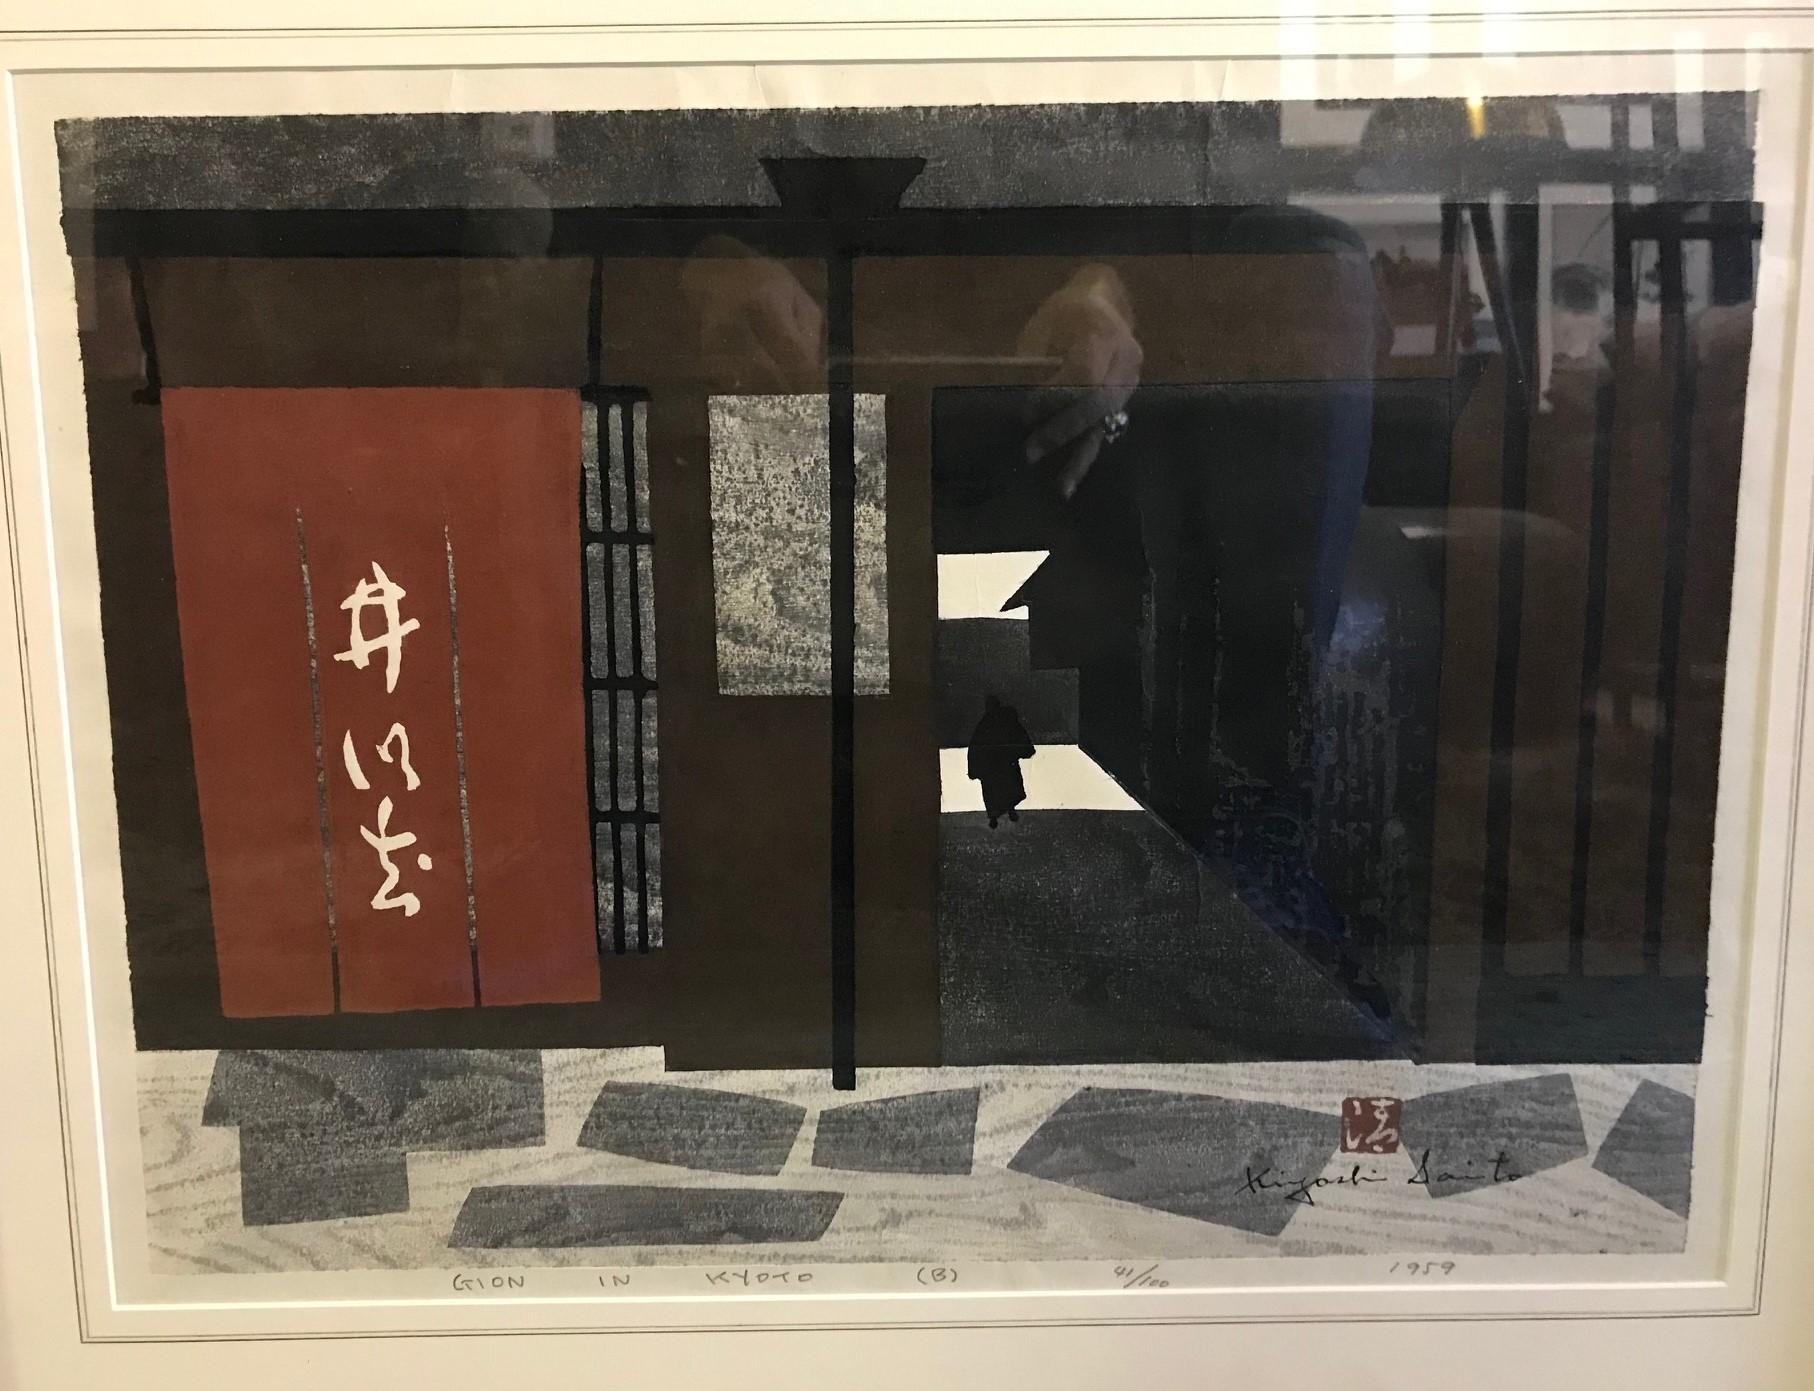 A beautifully composed, rare woodblock print by famed Japanese printmaker Kiyoshi Saito. Many consider Saito to be one of the most important, if not the most important, contemporary Japanese printmakers of the 20th century. This print of a cobbled